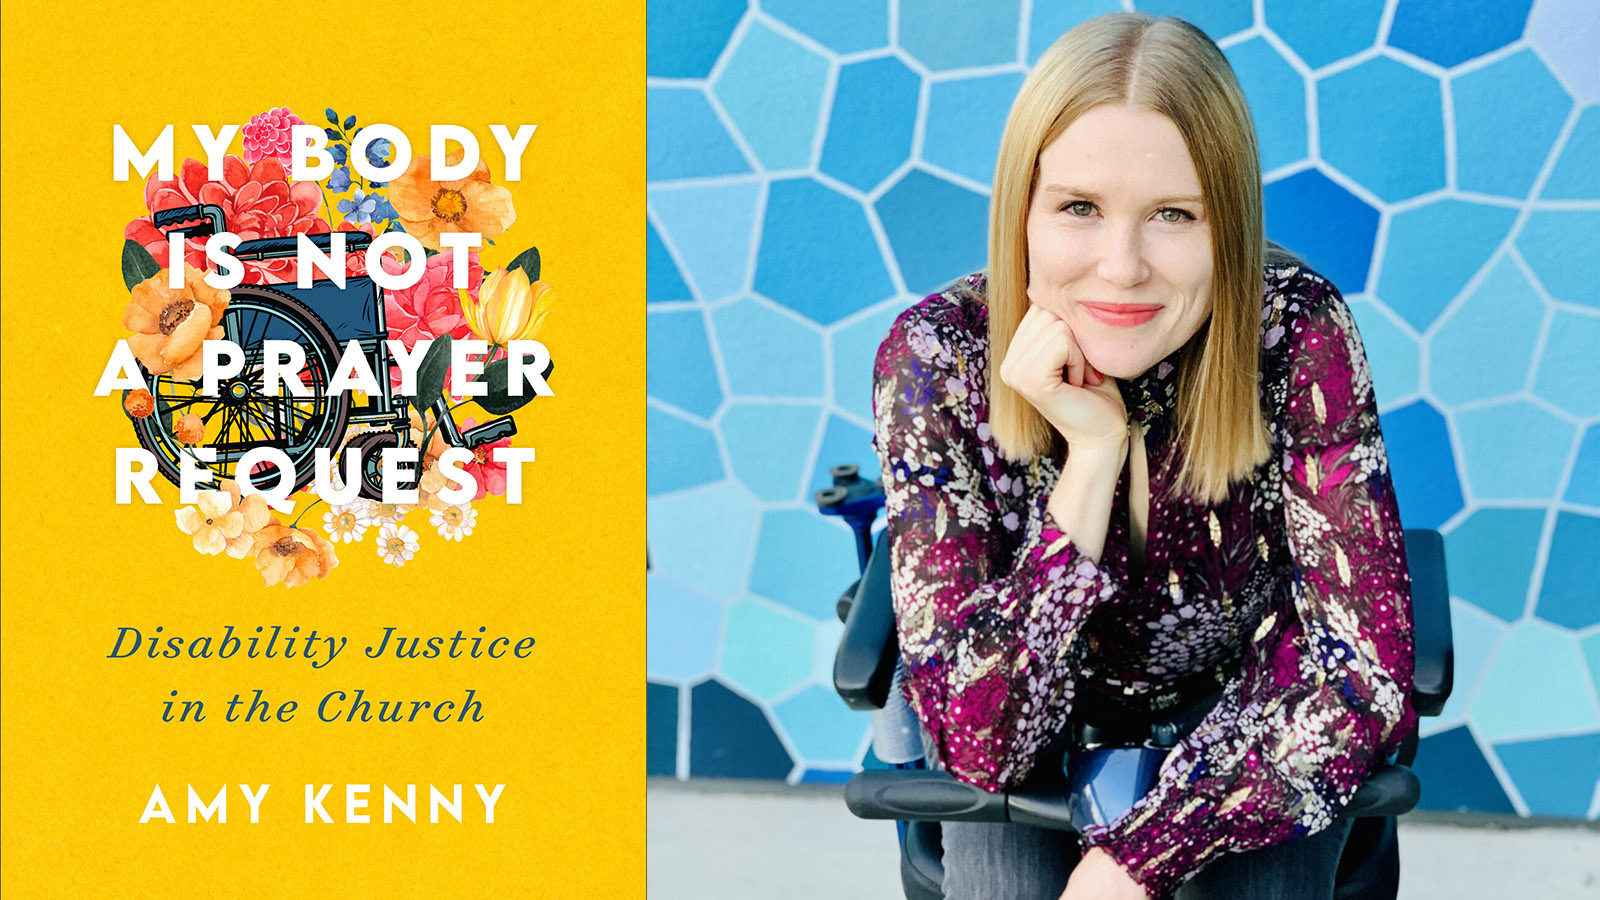 “My Body Is Not a Prayer Request" and author Amy Kenny. Courtesy images